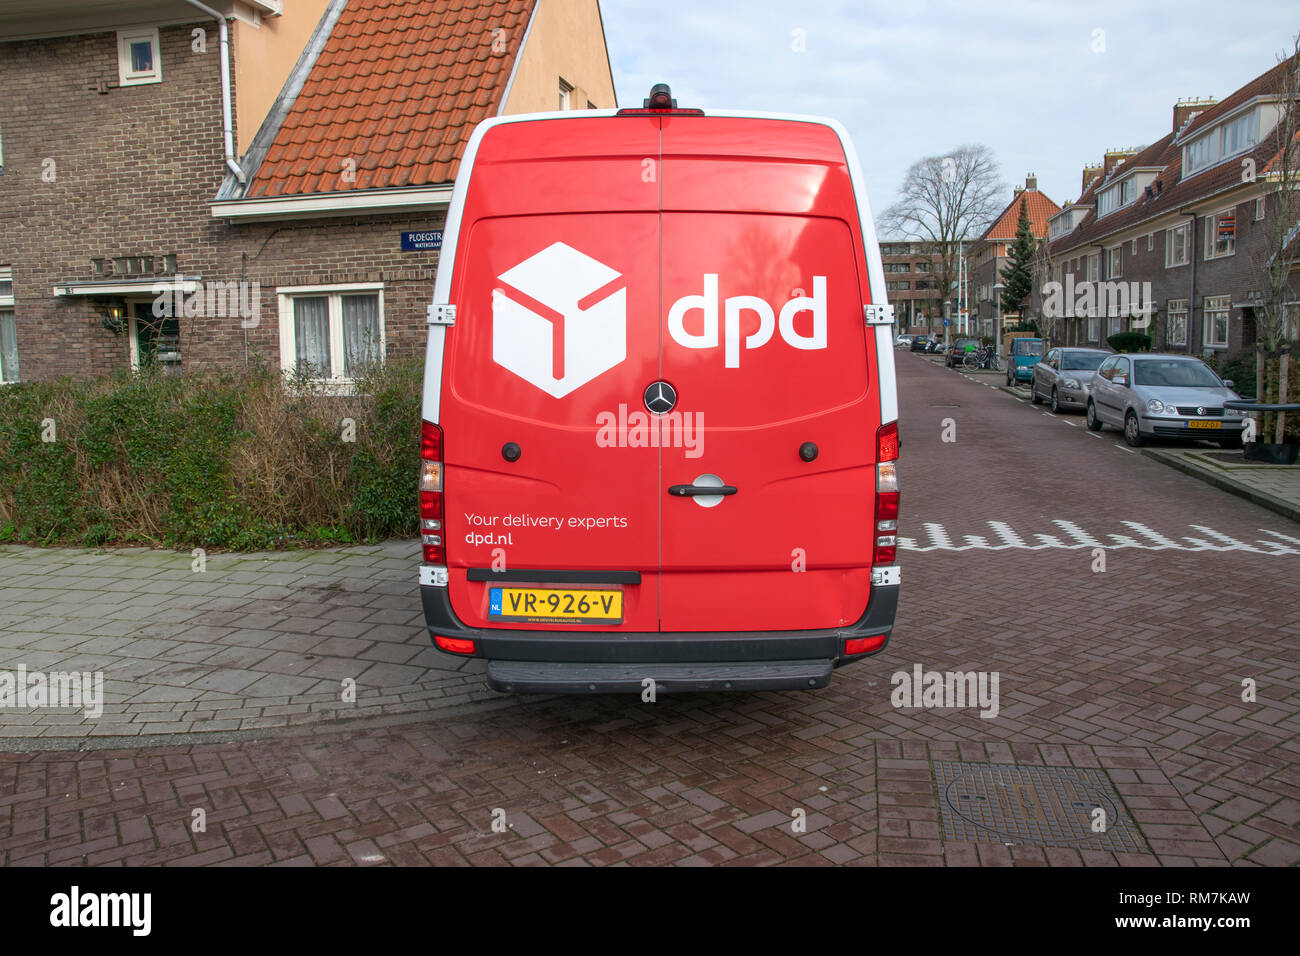 DPD Company Van At Amsterdam The Netherlands 2019 Stock Photo - Alamy